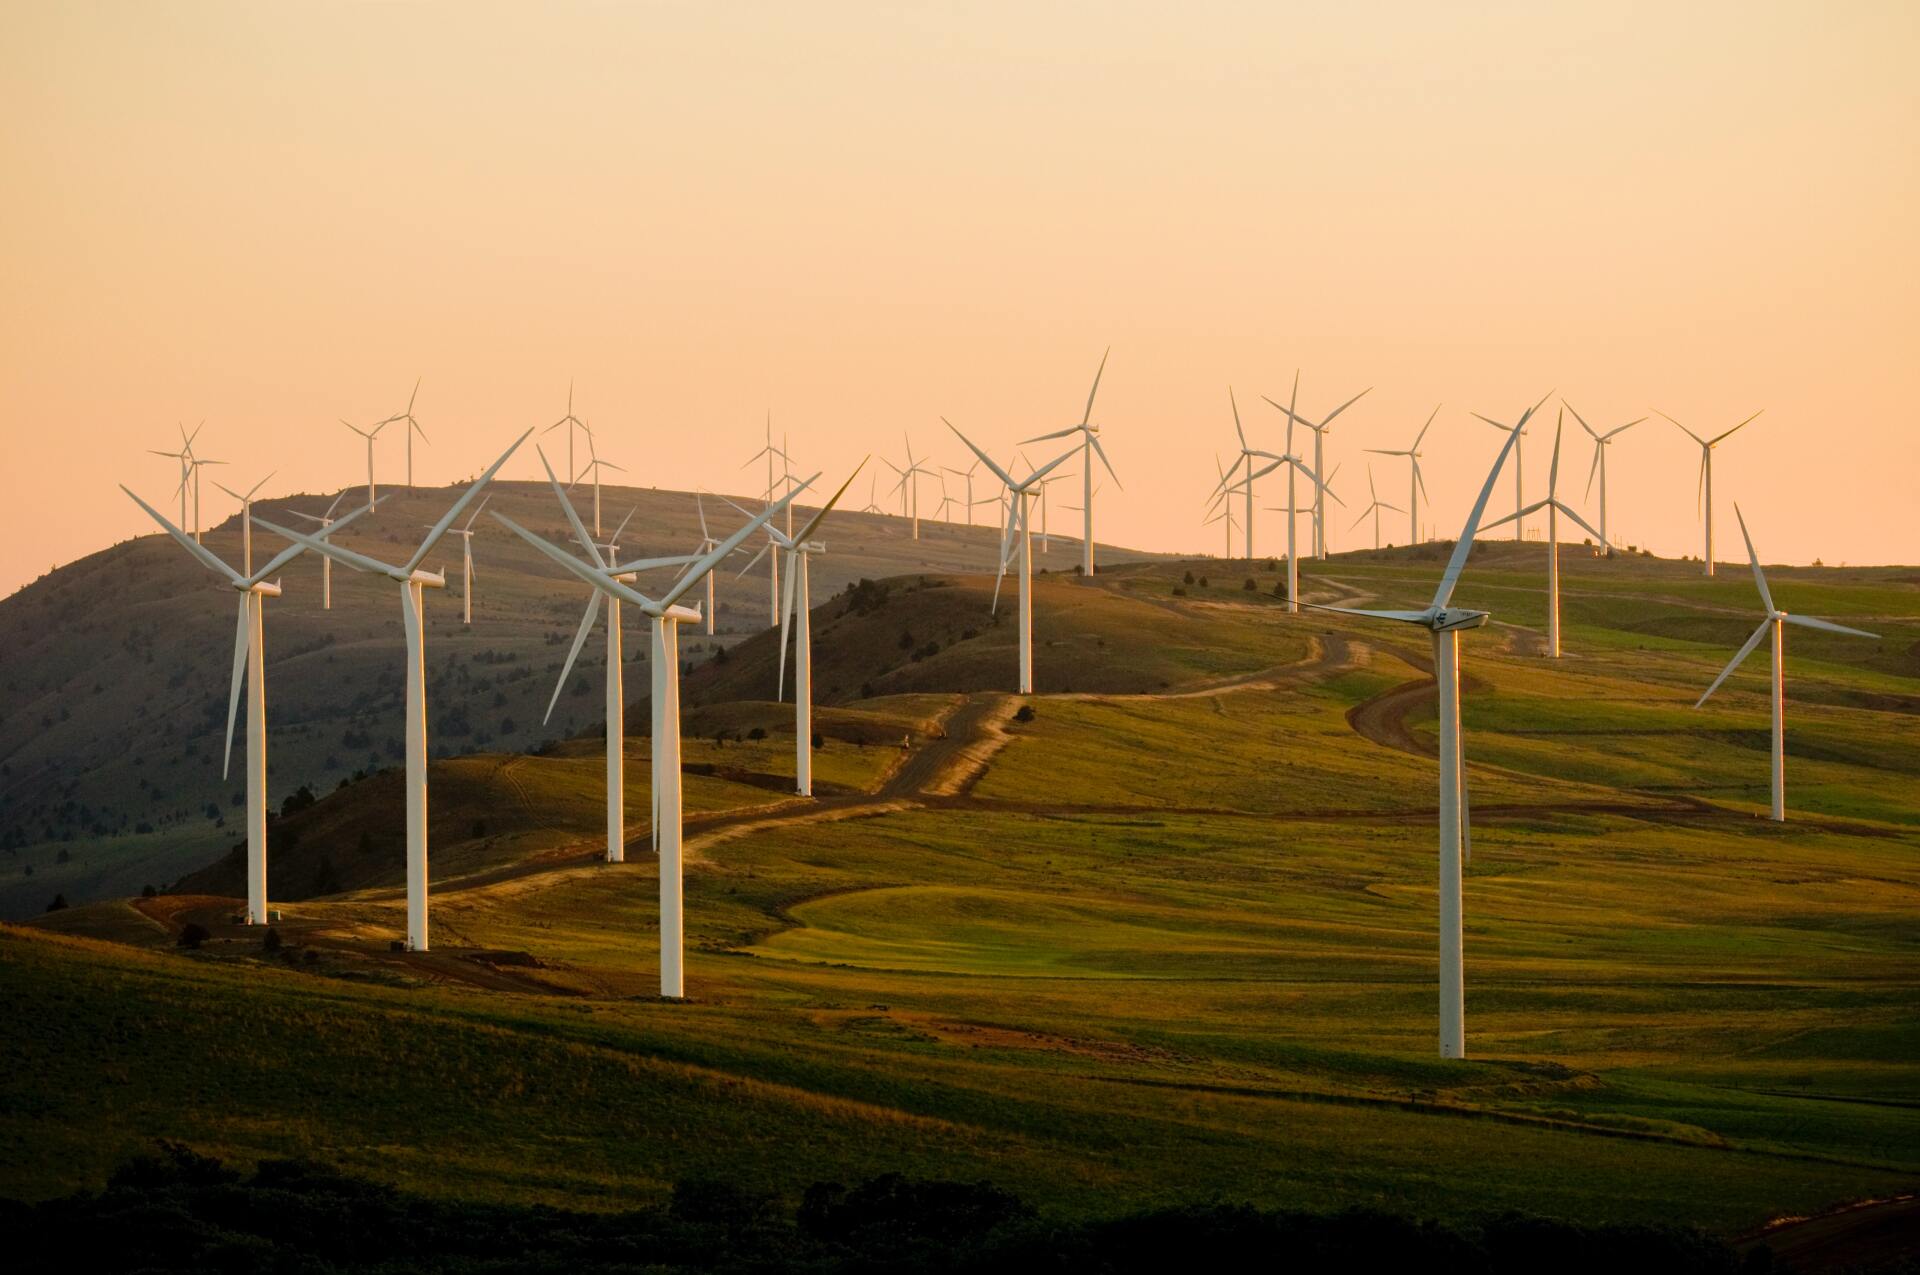 Several large windmills on a hill at sunset